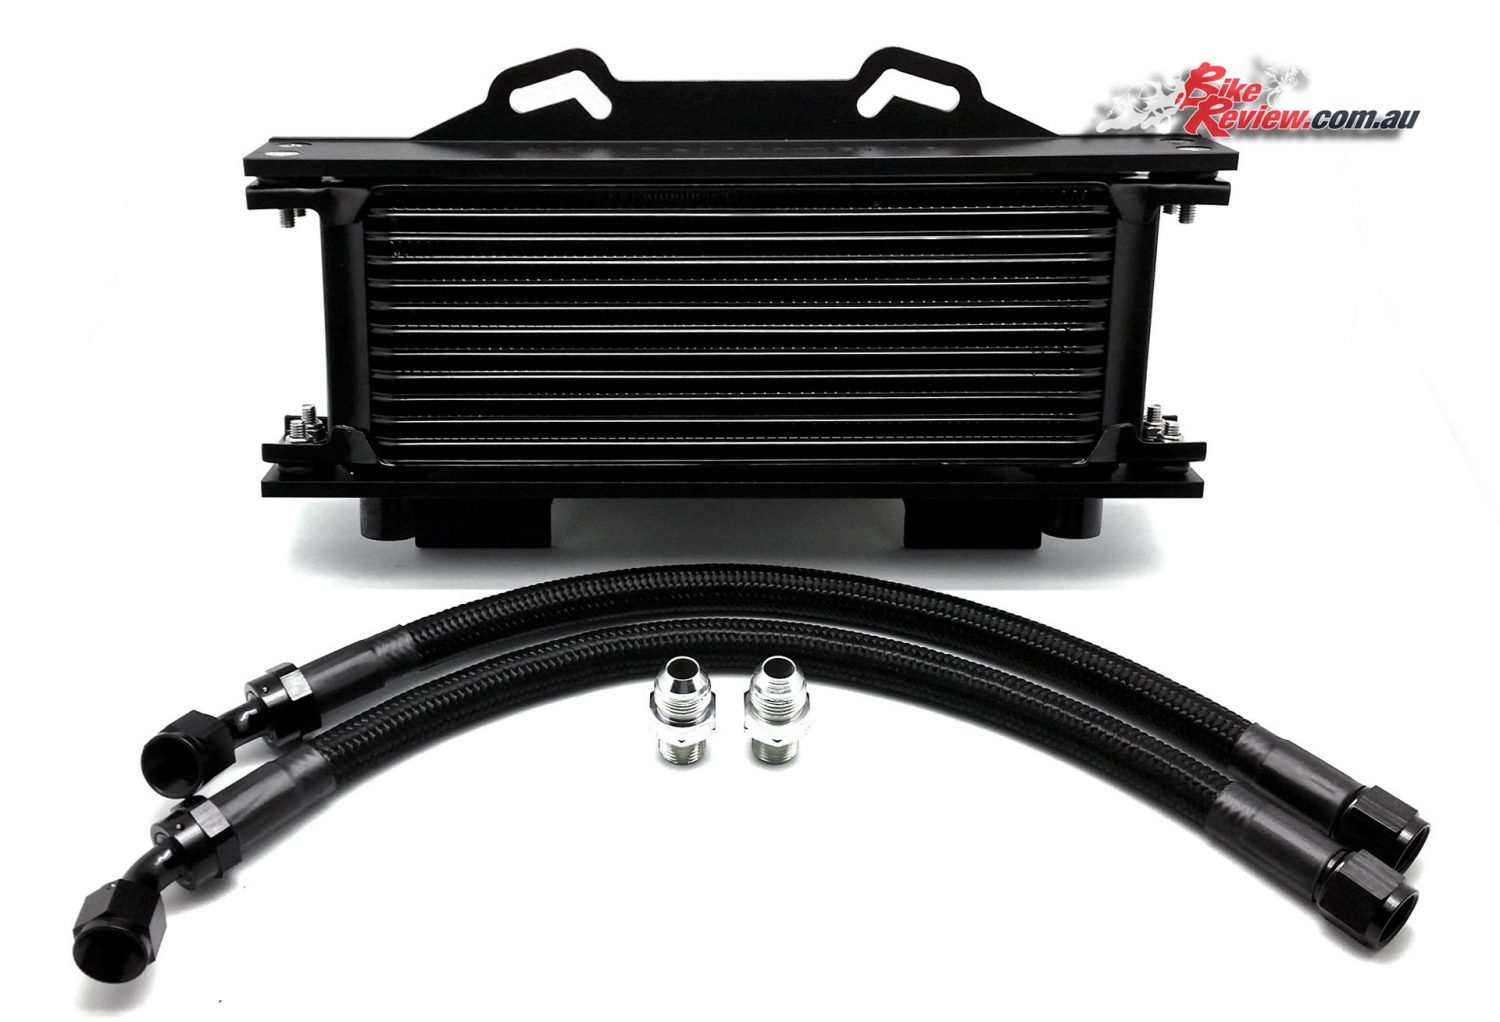 Hel Performance Oil Cooler Kit with braided black lines